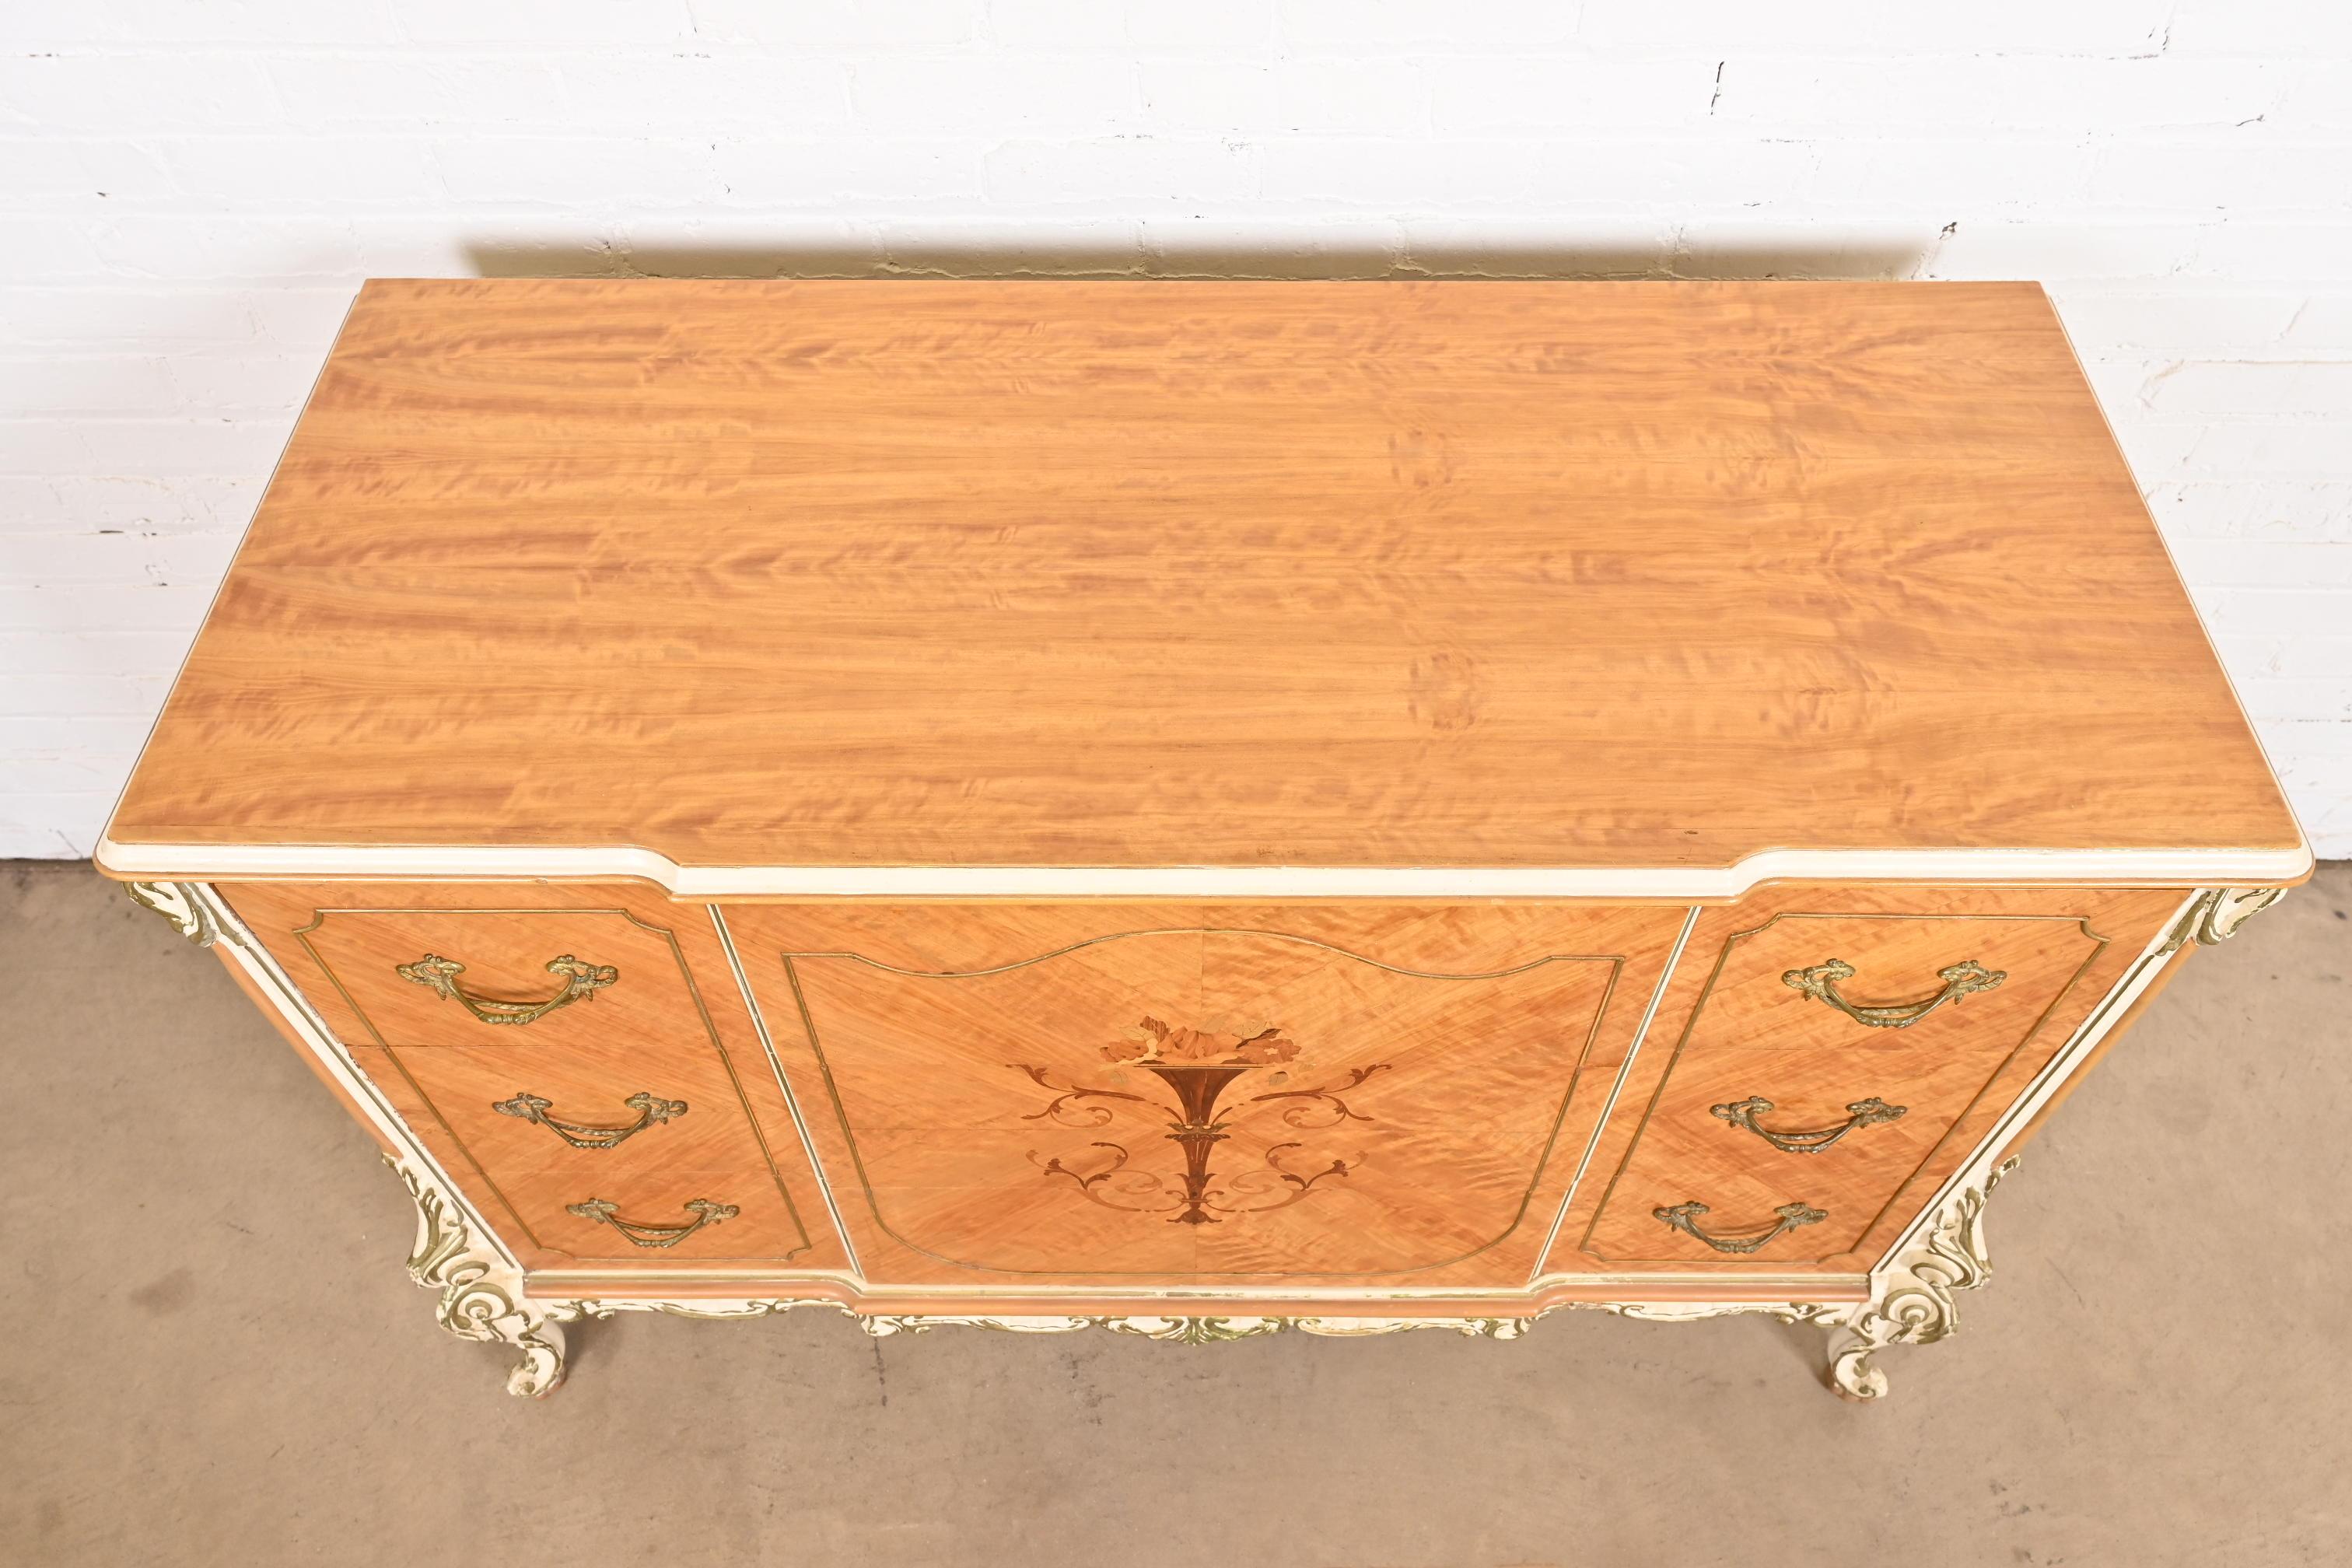 Romweber French Rococo Satinwood Inlaid Marquetry Parcel Painted Dresser, 1930s For Sale 7